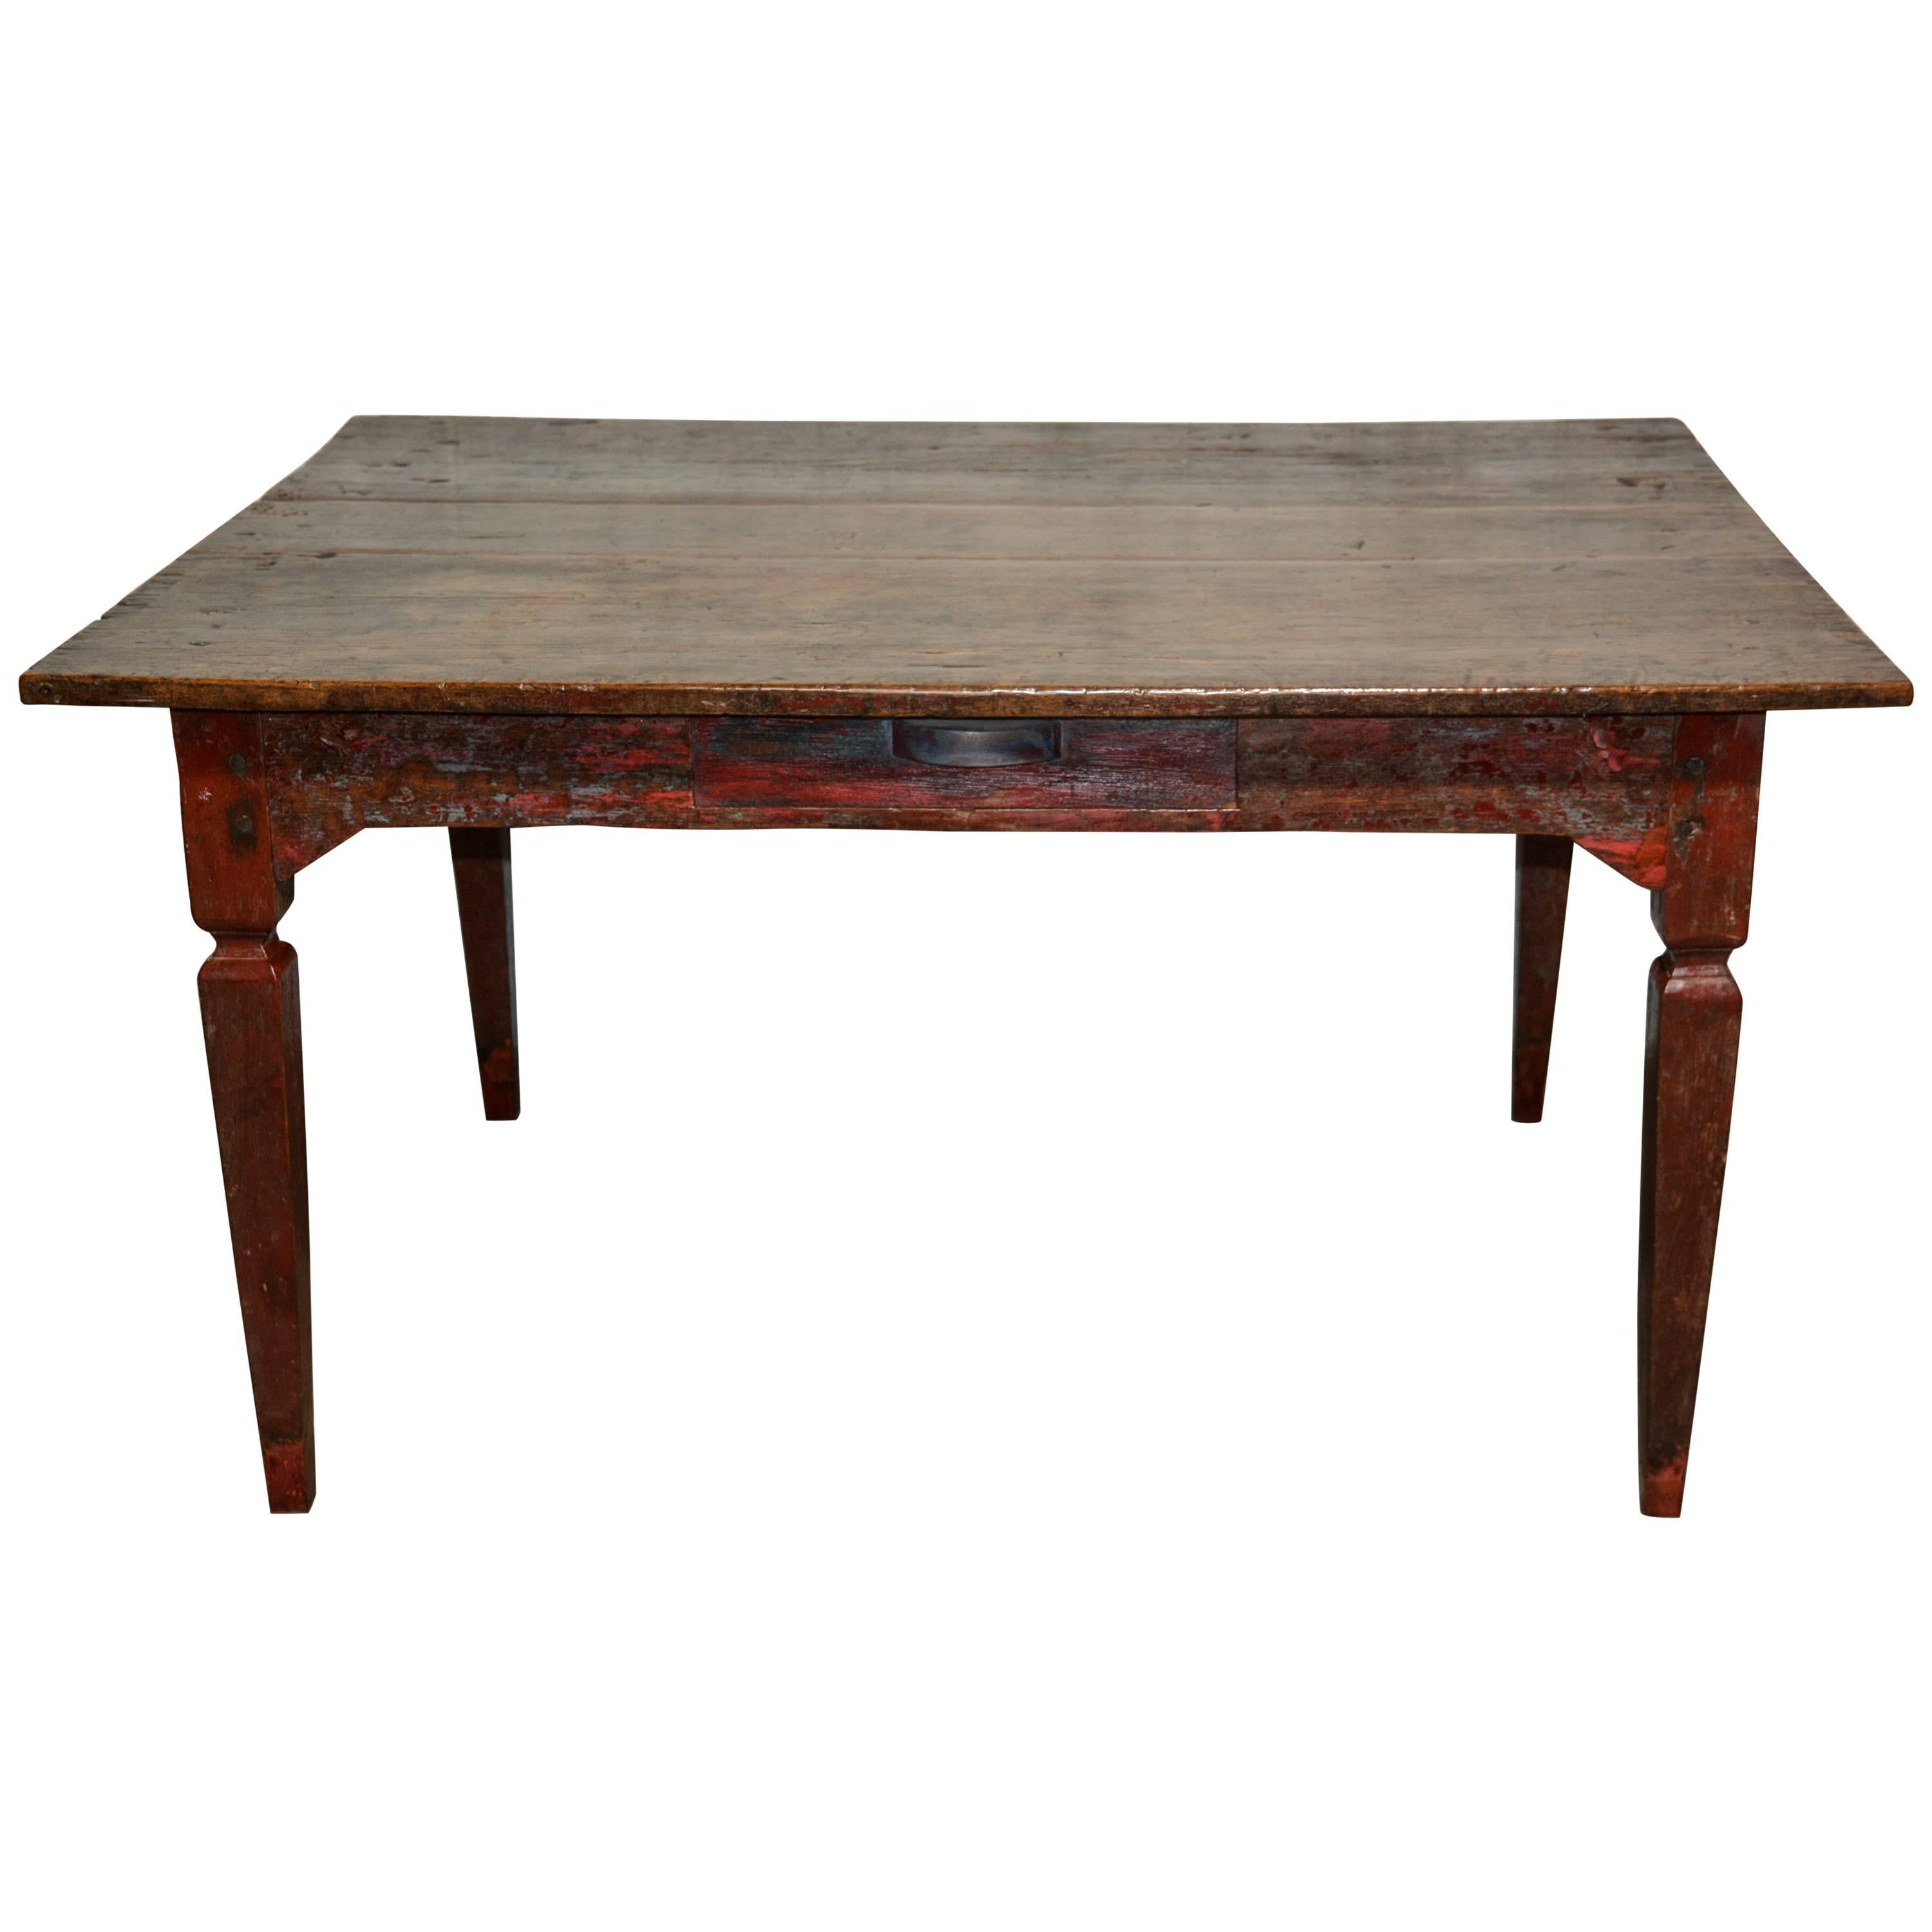 Vintage Teak Dining or Kitchen Table, Java, Early to Mid-20th Century